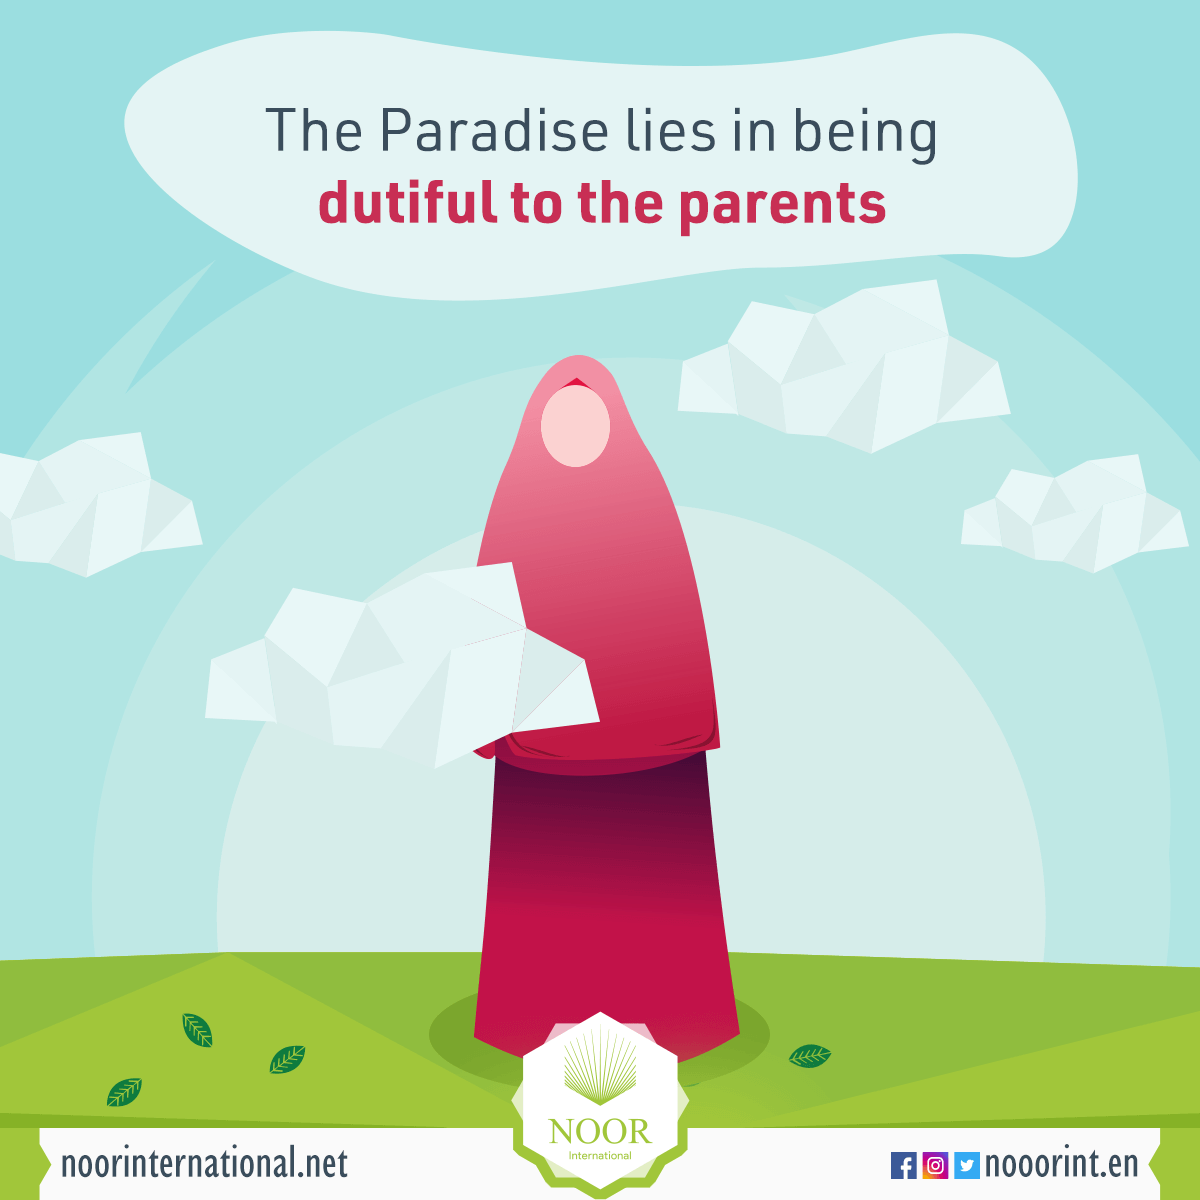 The Paradise lies in being dutiful to the parents